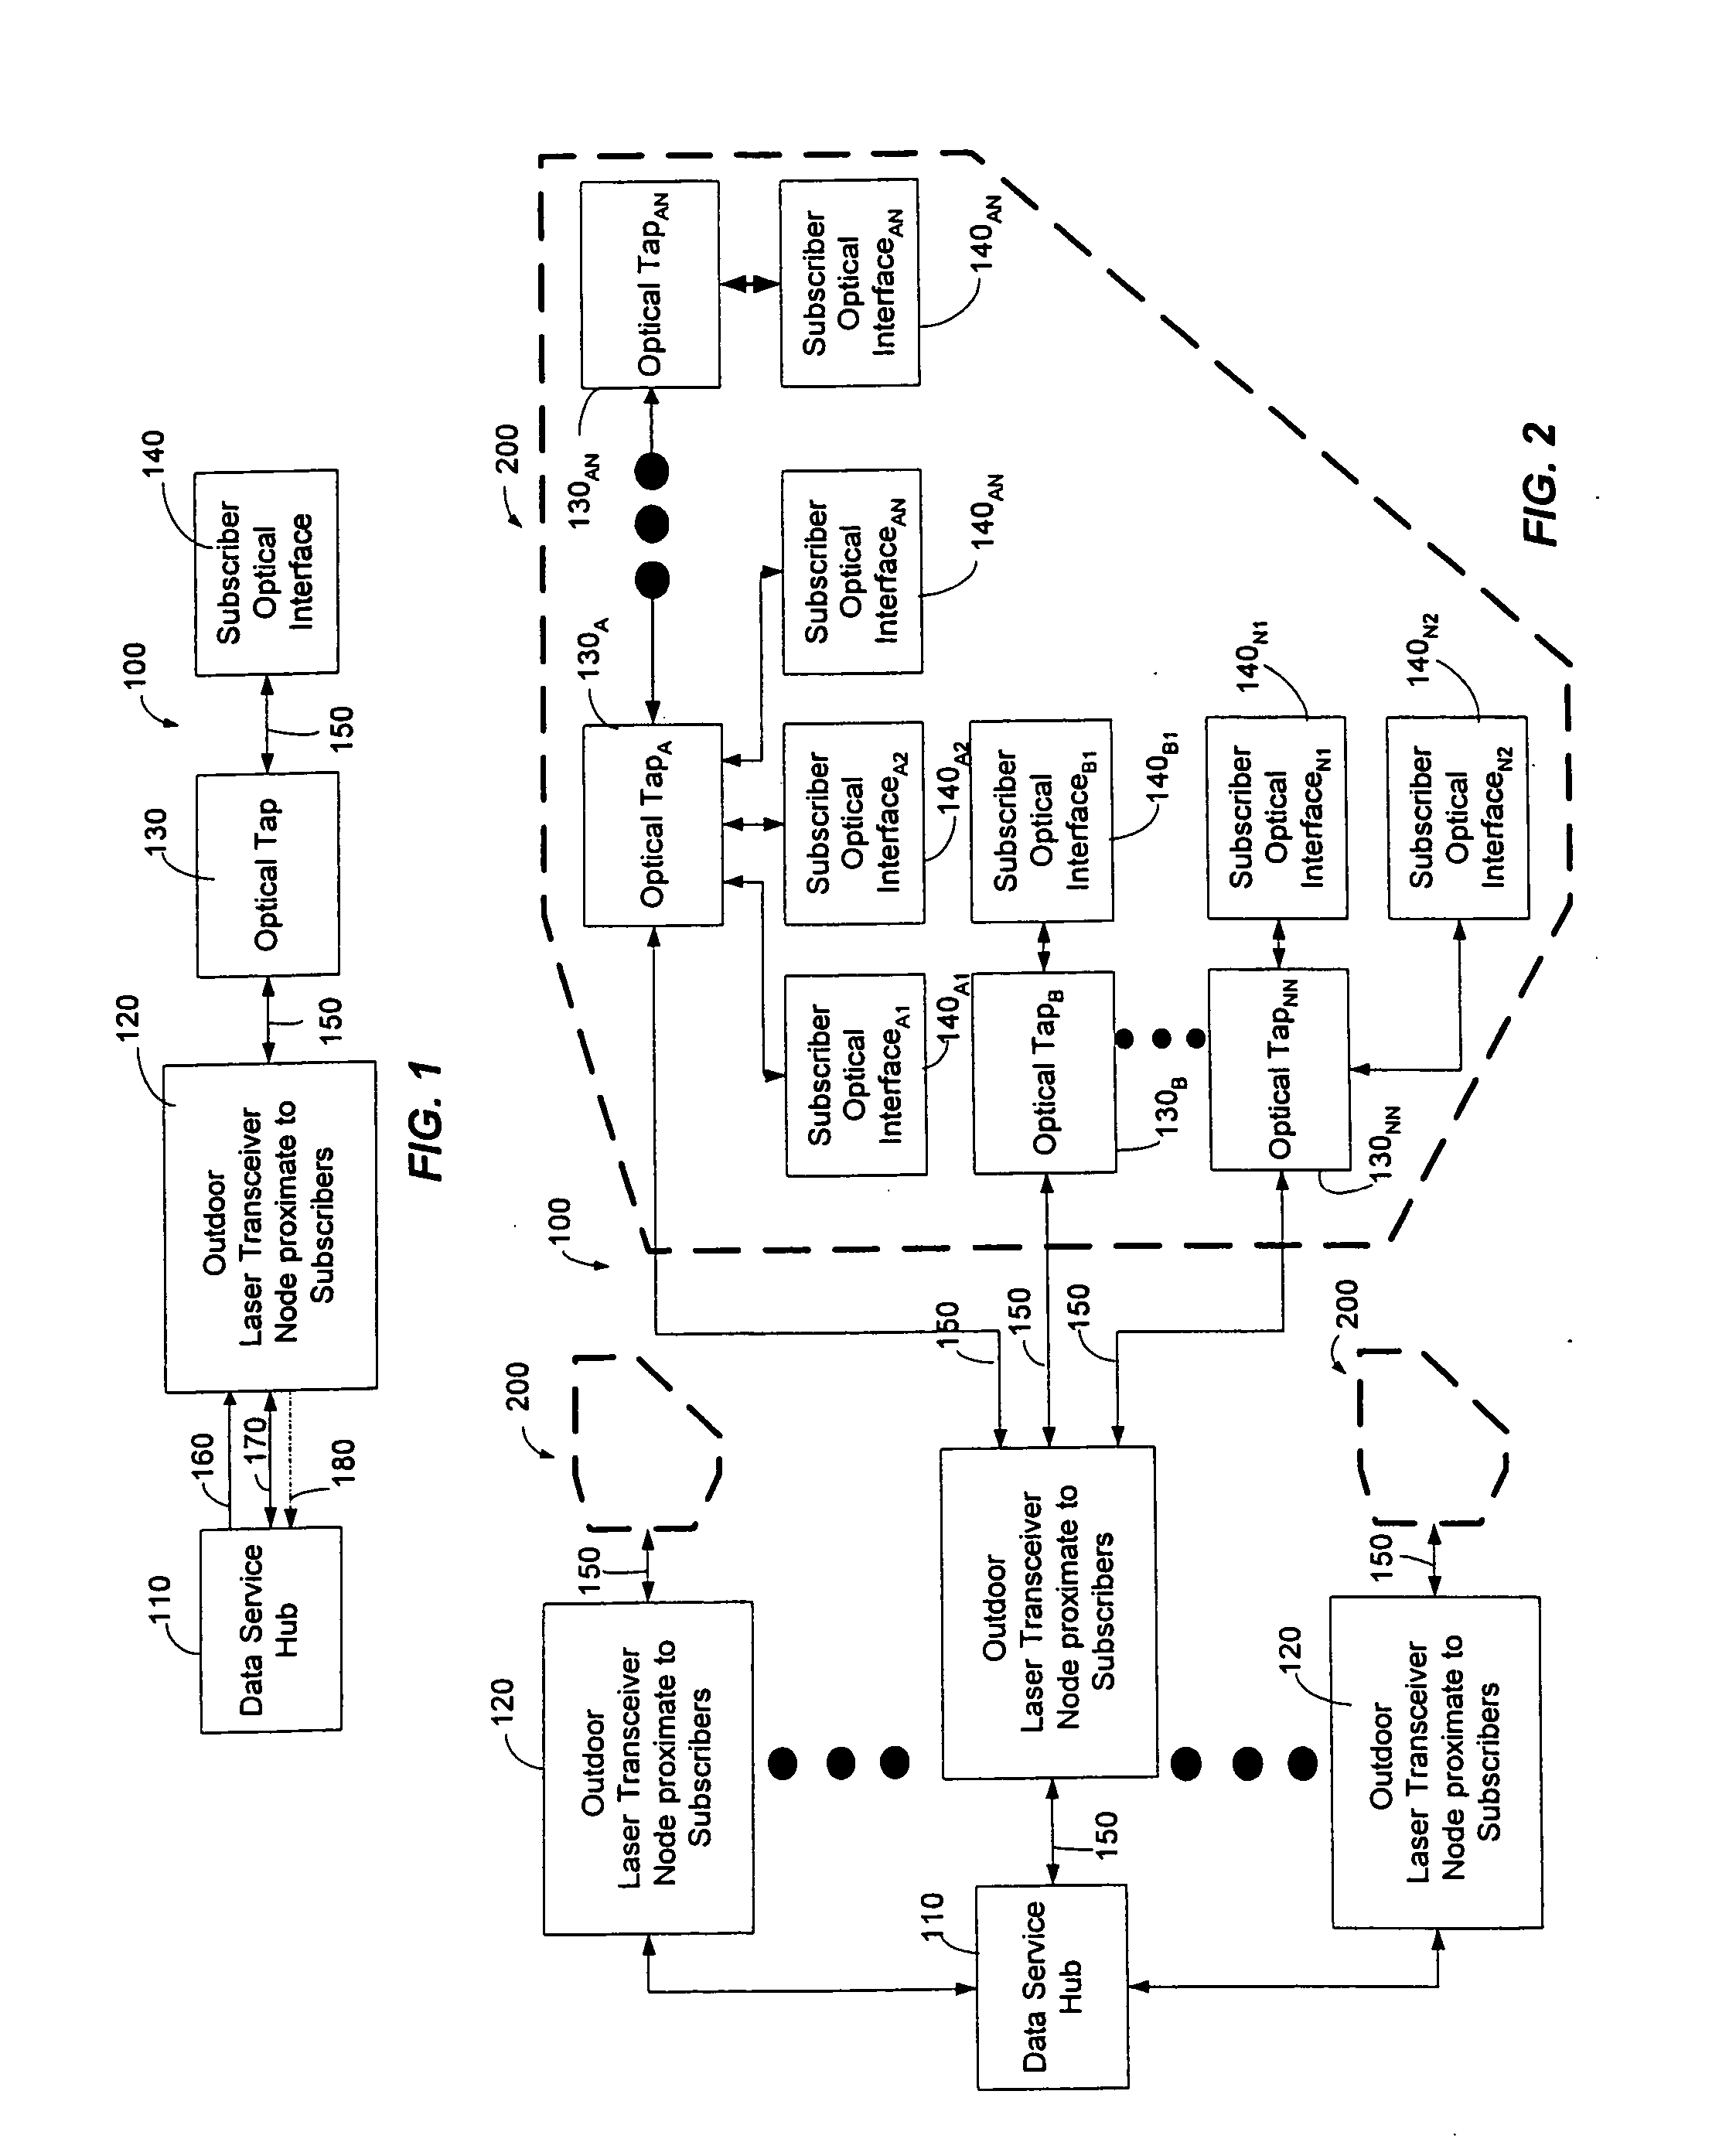 System and method for communicating optical signals between a data service provider and subscribers